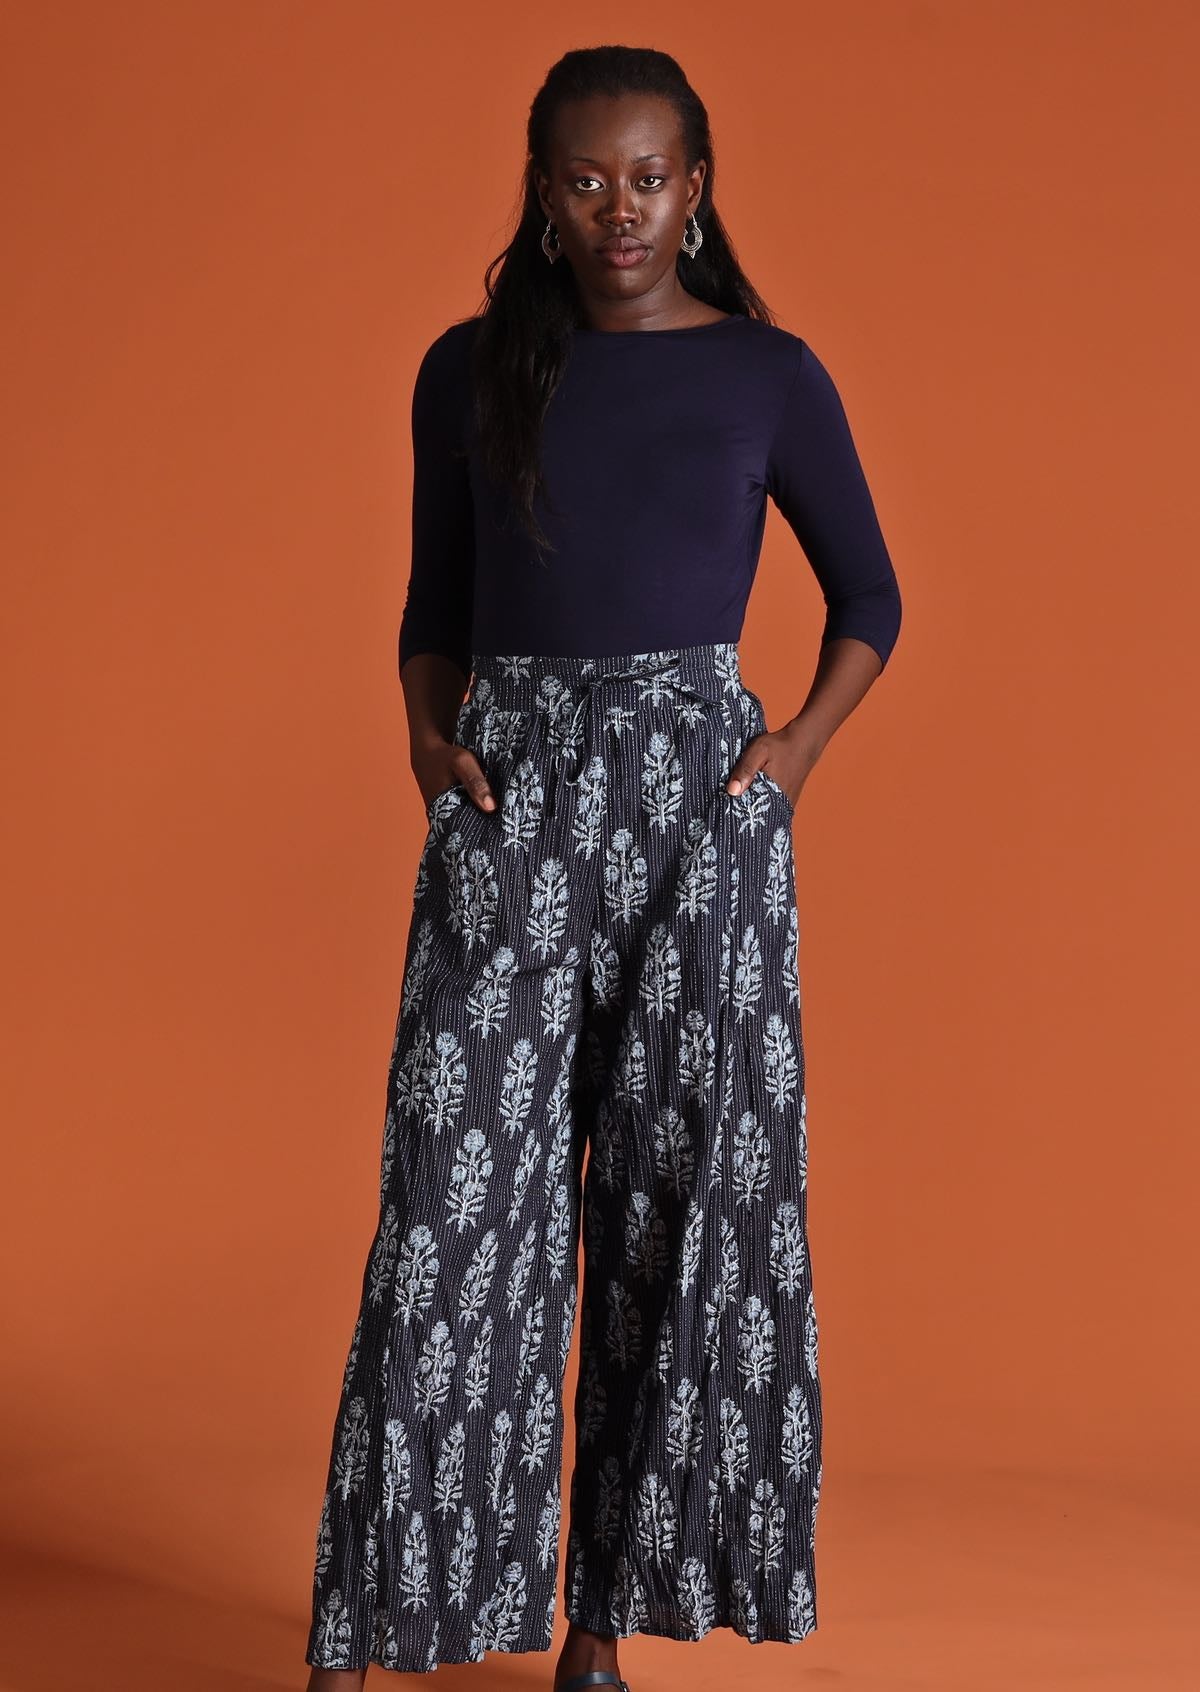 Model wearing wide legged women's cotton pants and long sleeve navy stretch top